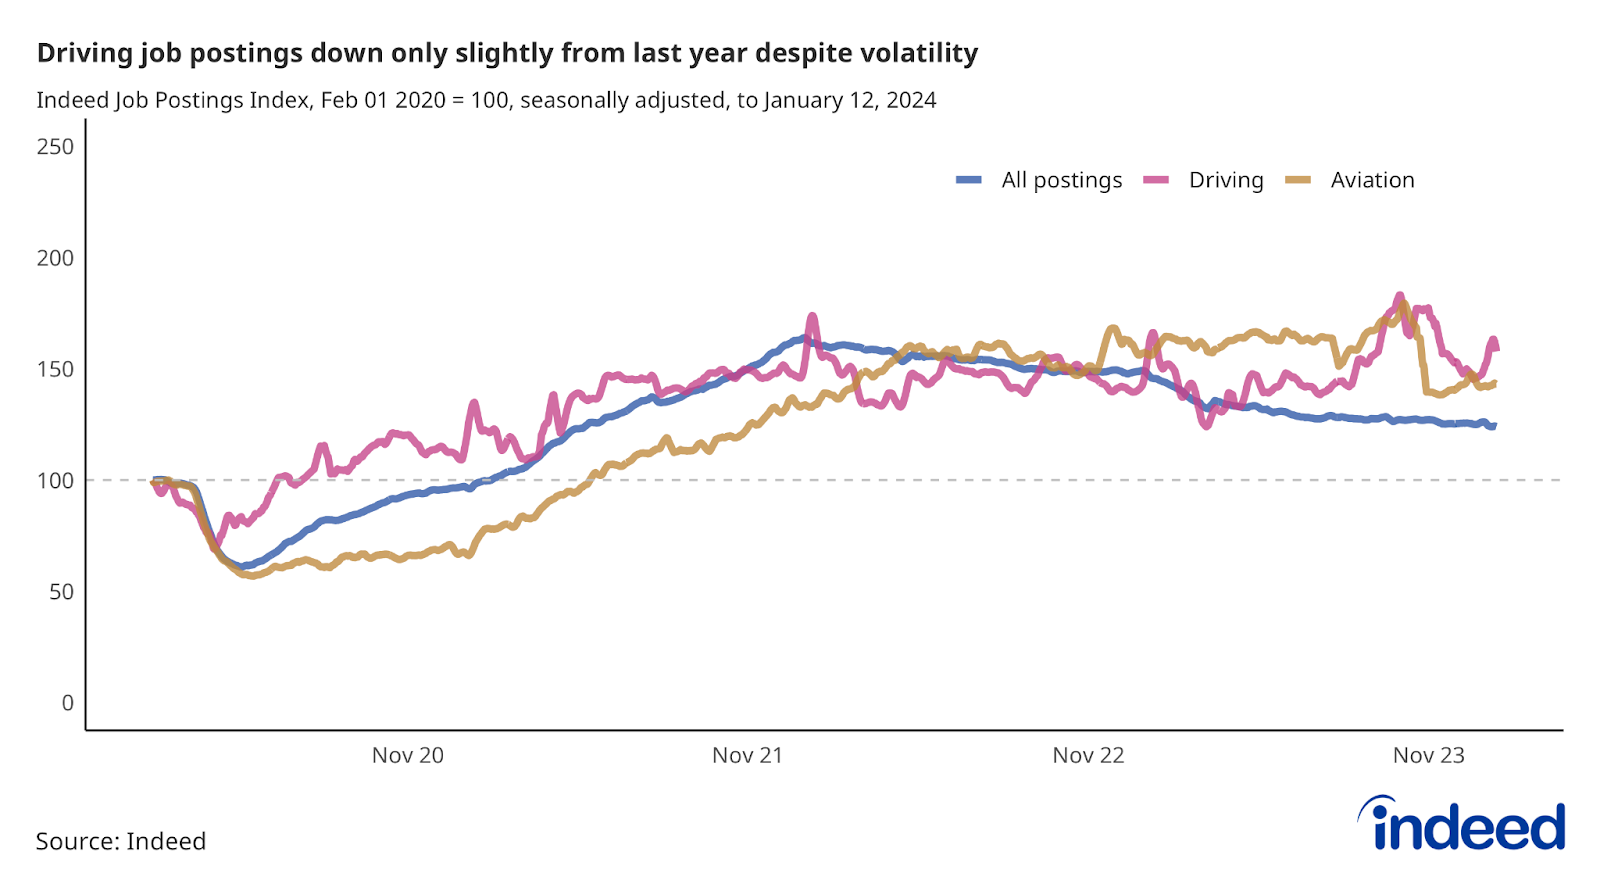 Line chart titled “Driving job postings down only slightly from last year despite volatility,” shows job postings in Driving and Aviation to Jan. 12, 2024. Aviation and Driving postings have declined marginally over the past year. 